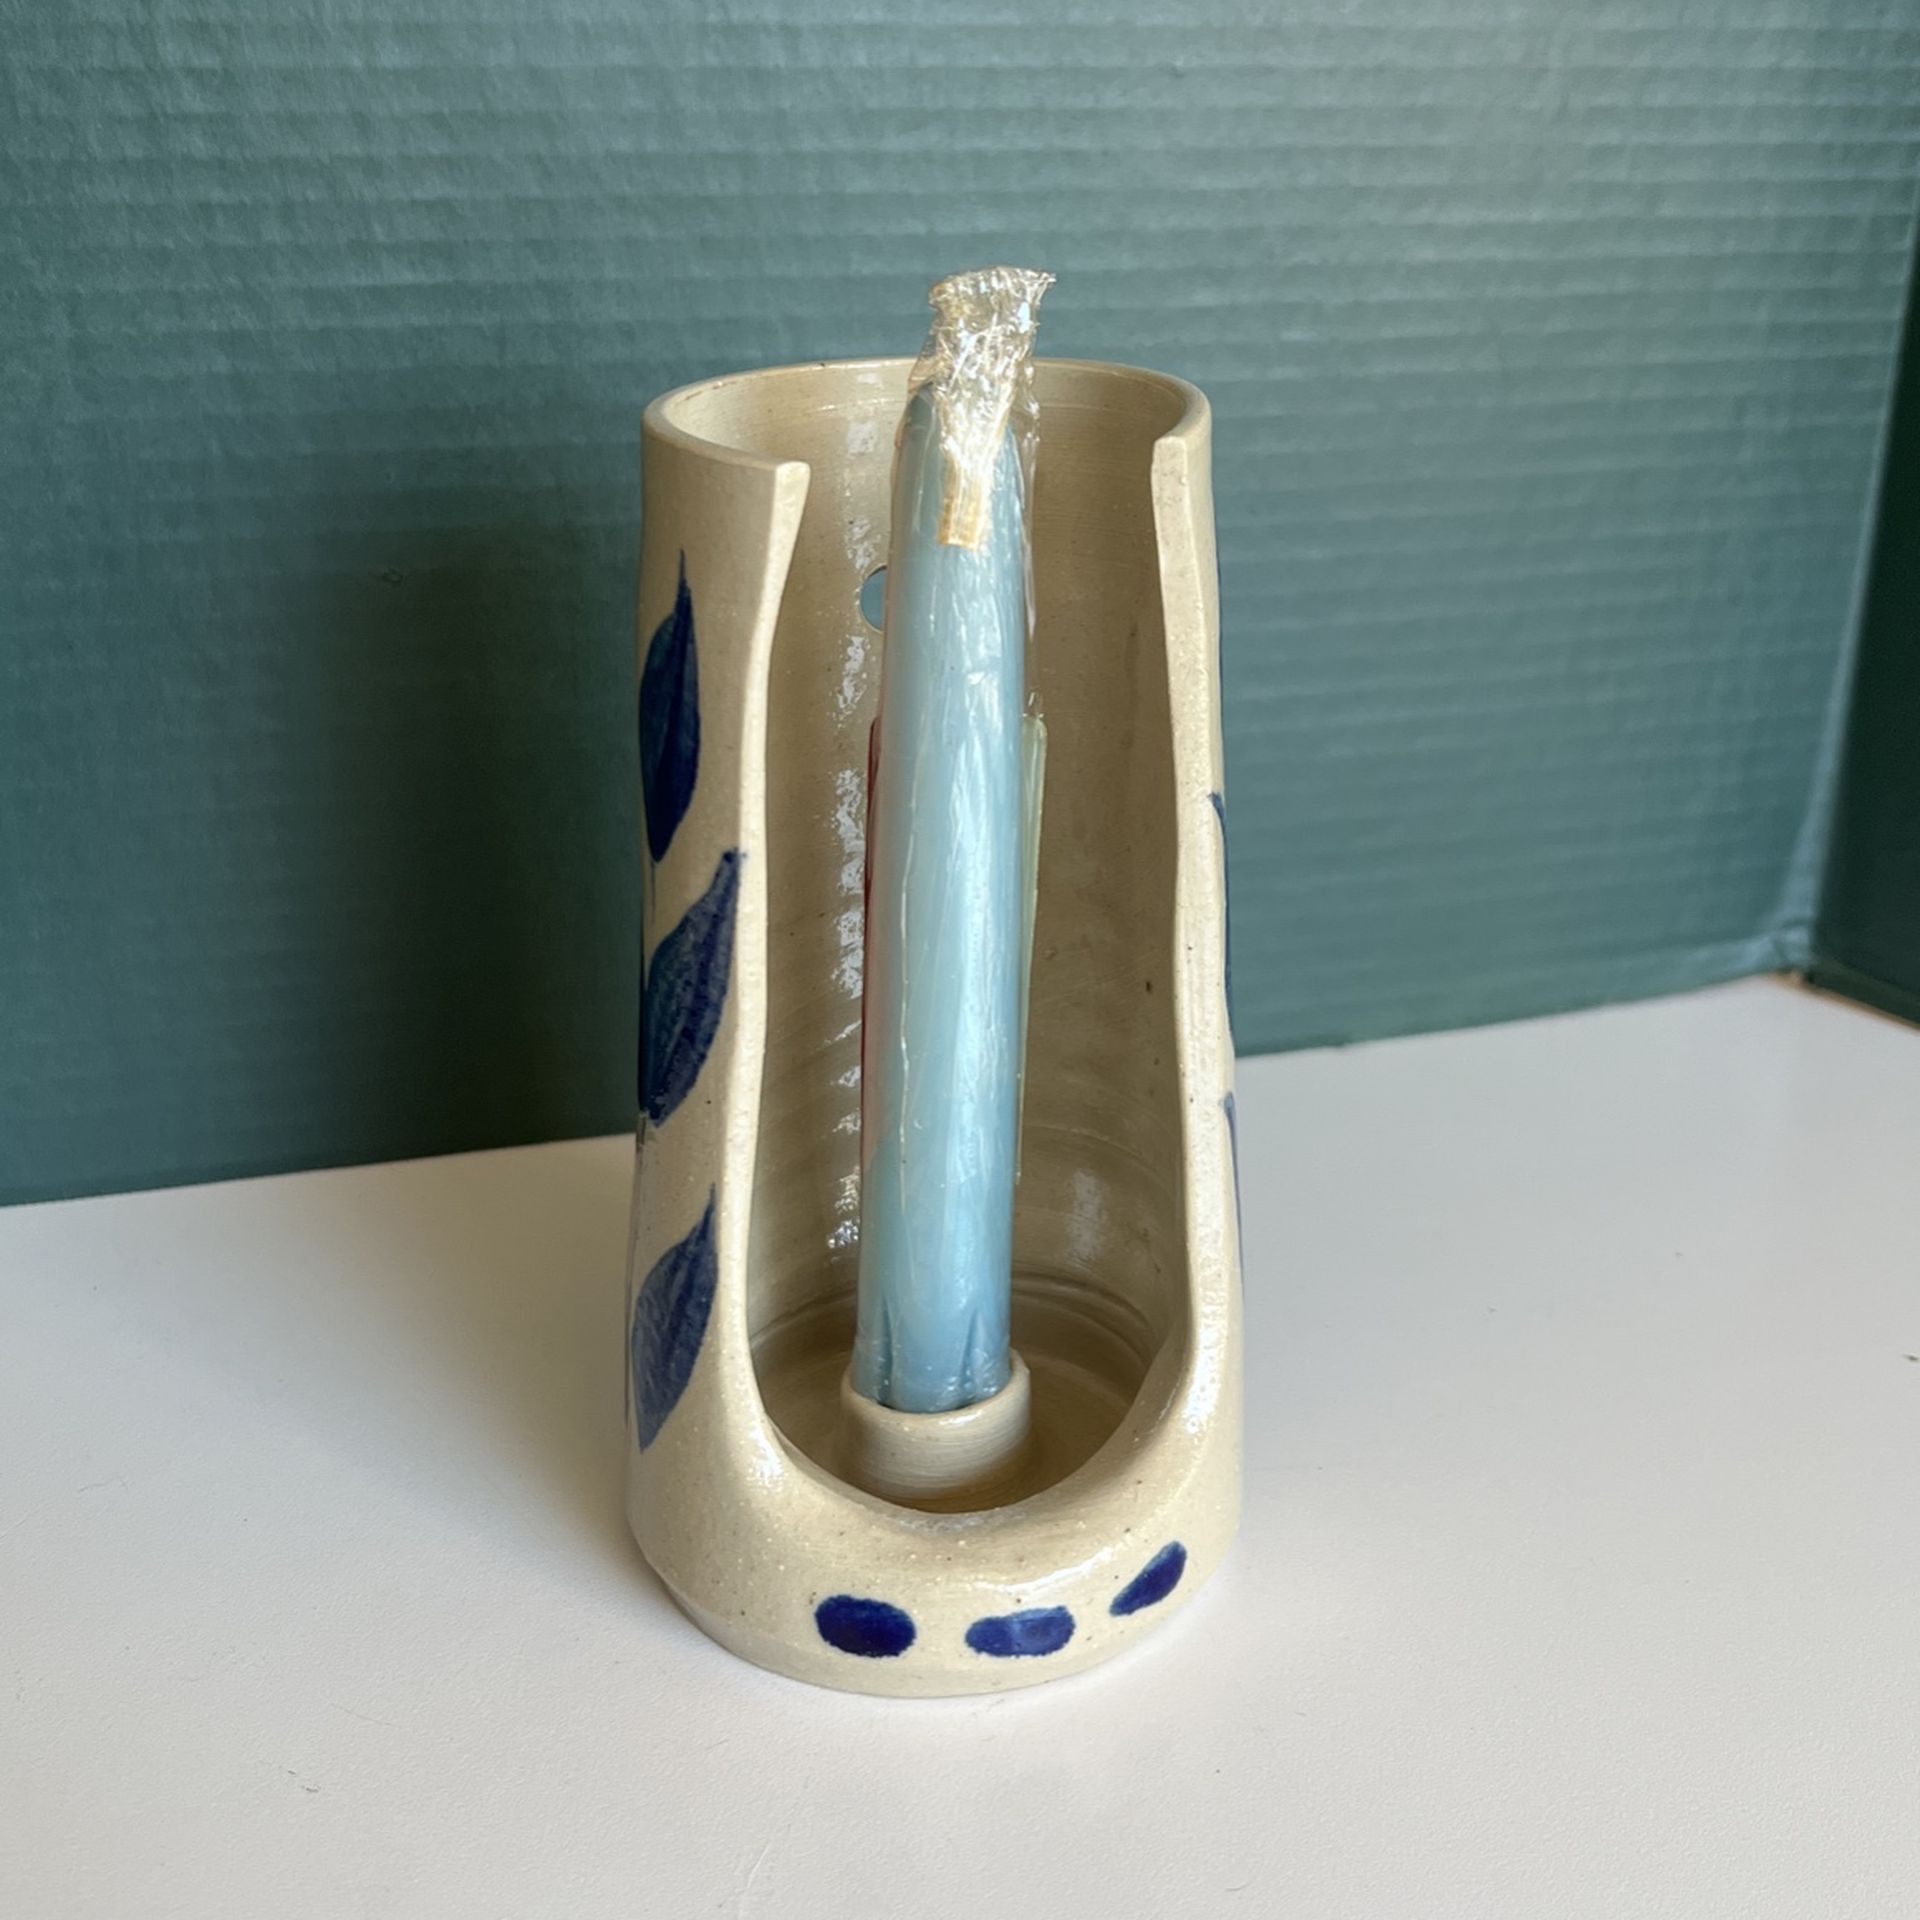 Williamsburg Pottery Candle Holder